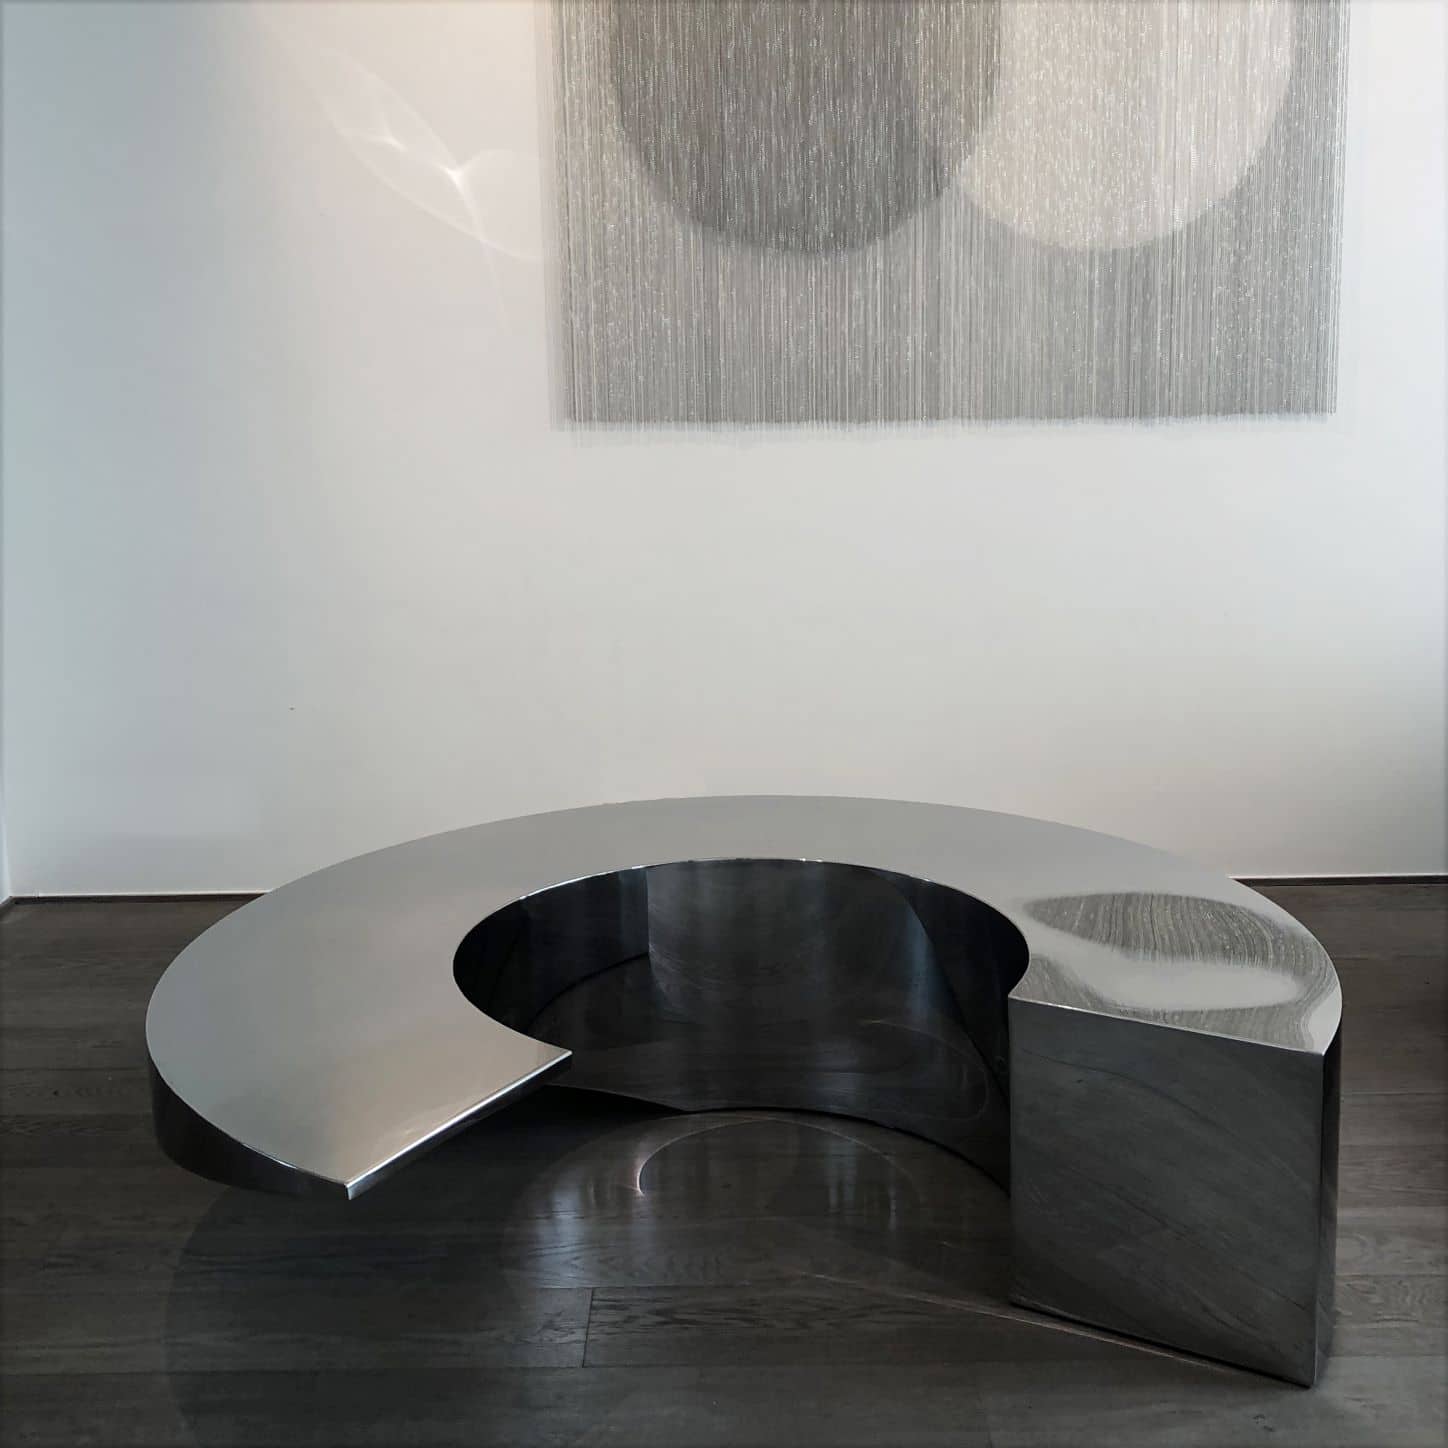 Circle Table Stainless steel polished 2022 H 40 – 150 cm 60 kg Limited edition of 8